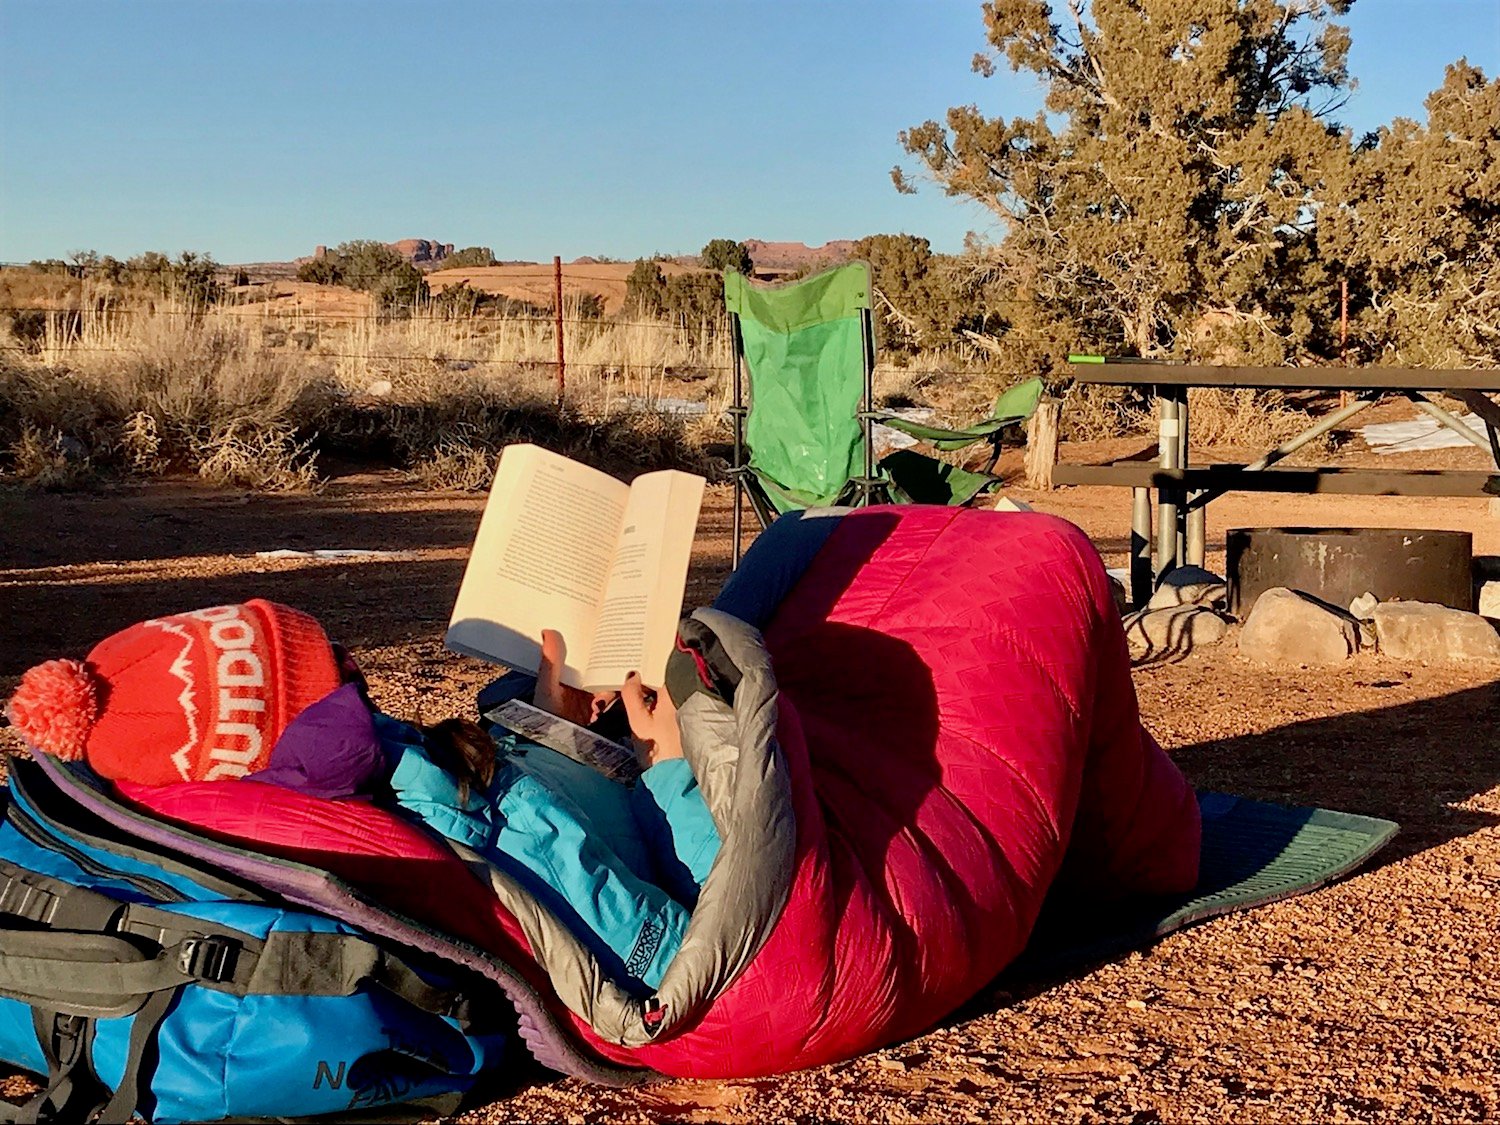 Slickrock Overnight. It doesn't always have to be a gnarly adventure––sometimes getting outside means reading a good book from the comfort of your sleeping bag.